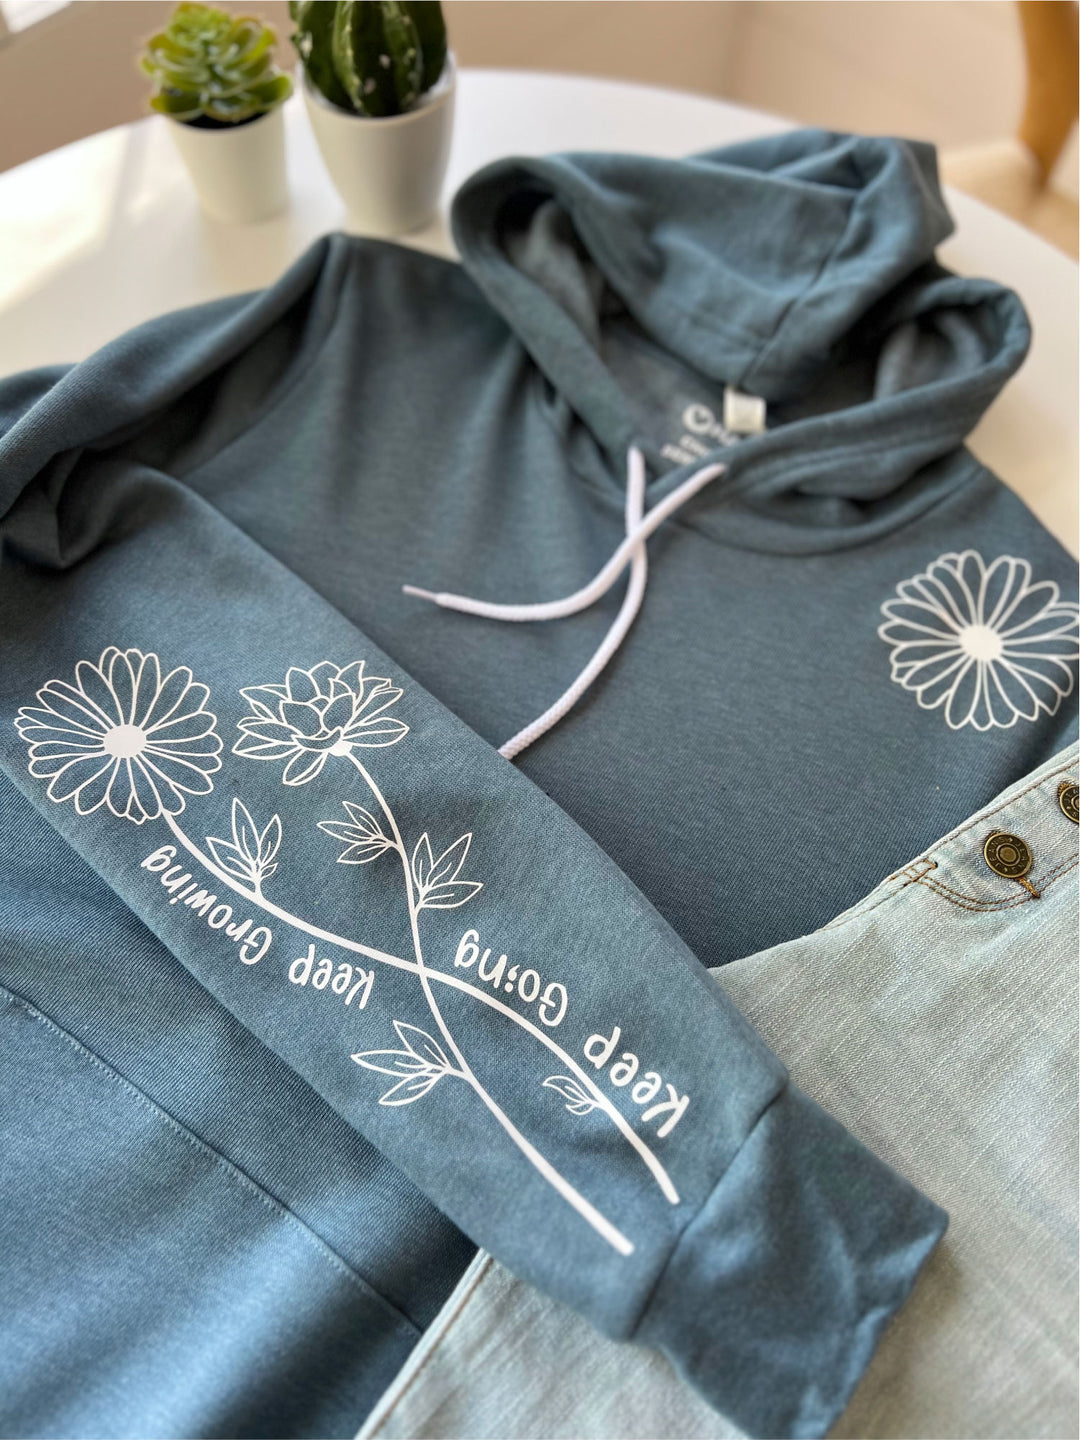 Sudadera de terapia ocupacional – Suéter Grow to Your Full Potential  Flowers Sweater OT